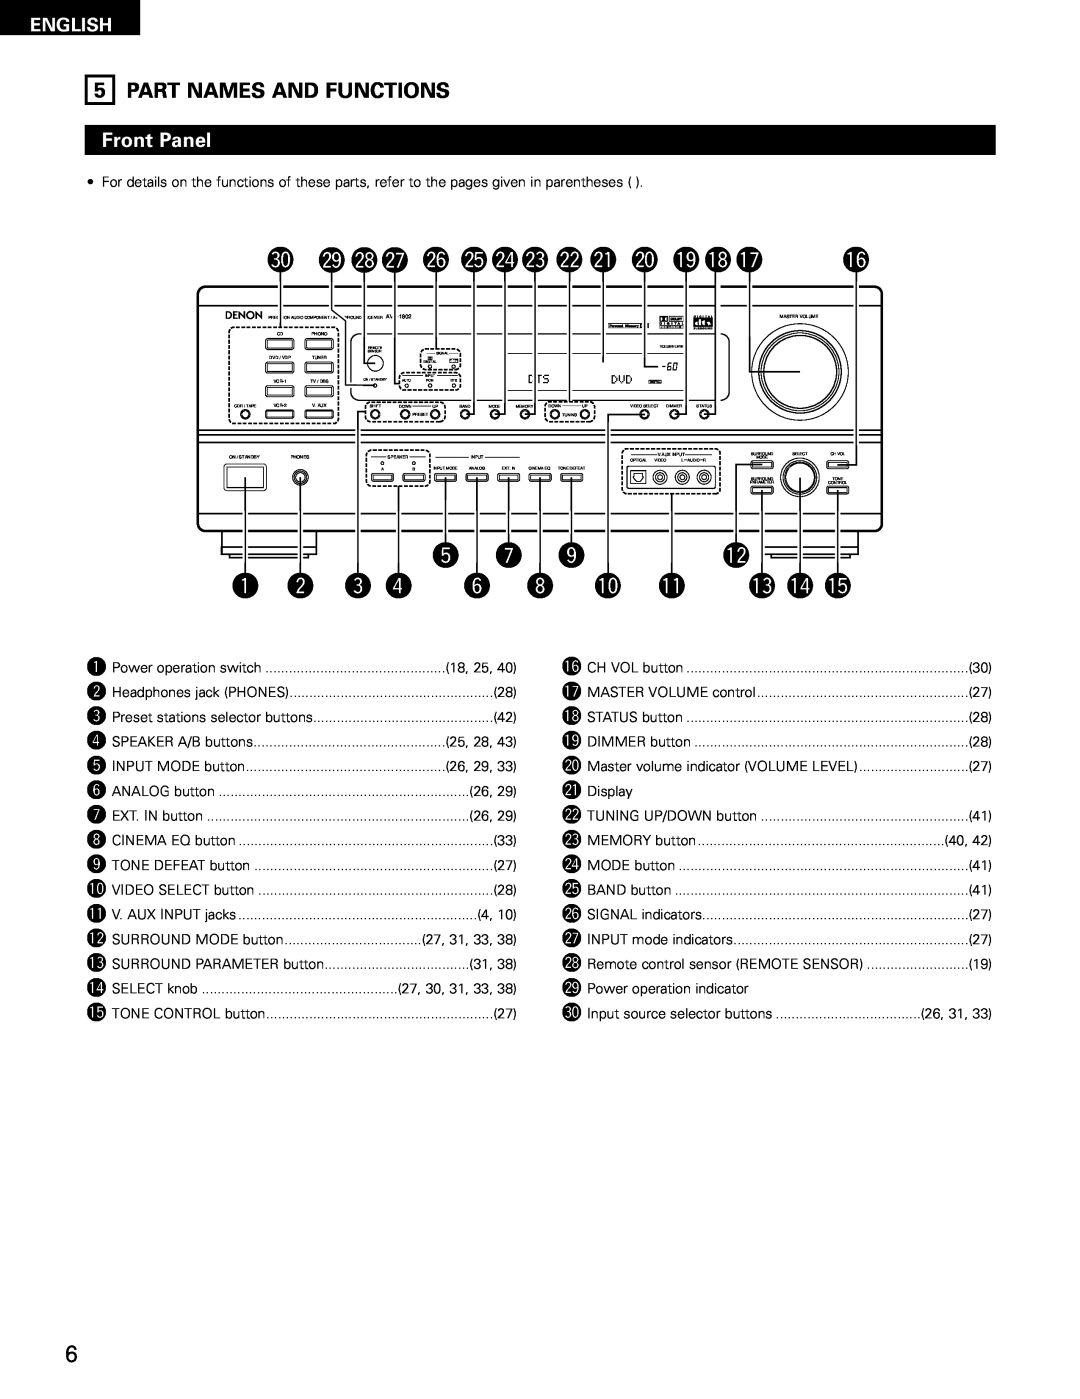 Denon AVR-1802/882 manual q w e r, 0 !1, 3!4!5, #0 @9@8@7@6@5@4@3@2@1 @0 !9!8!7, Part Names And Functions, English 